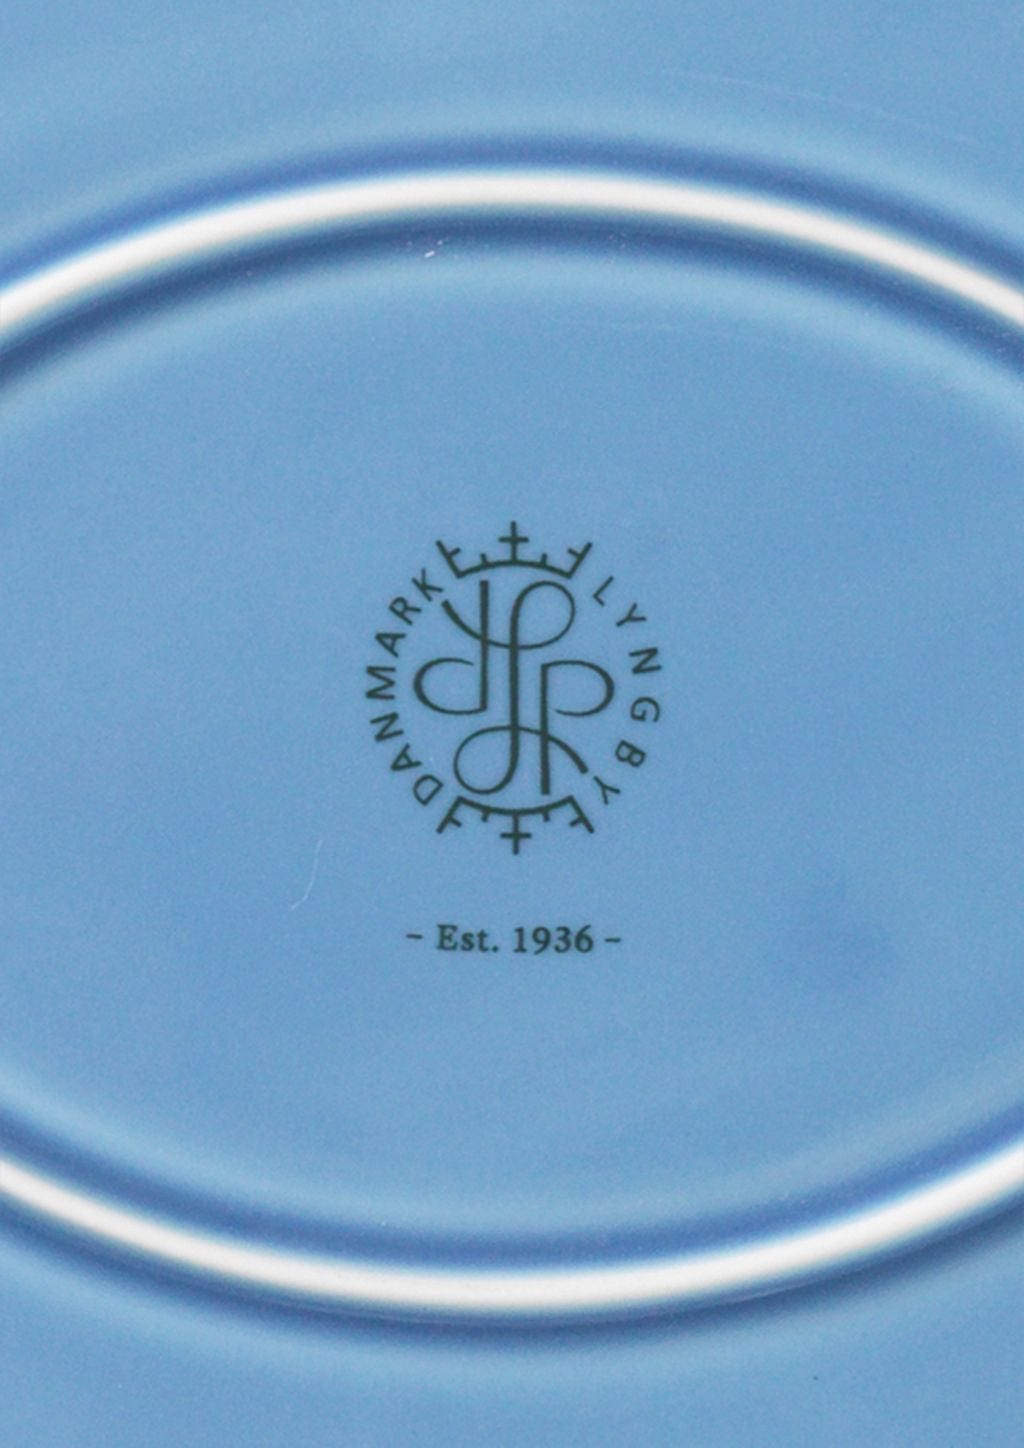 Lyngby Porcelæn Rhombe Color Oval Serving Plate 28,5x21,5, azul